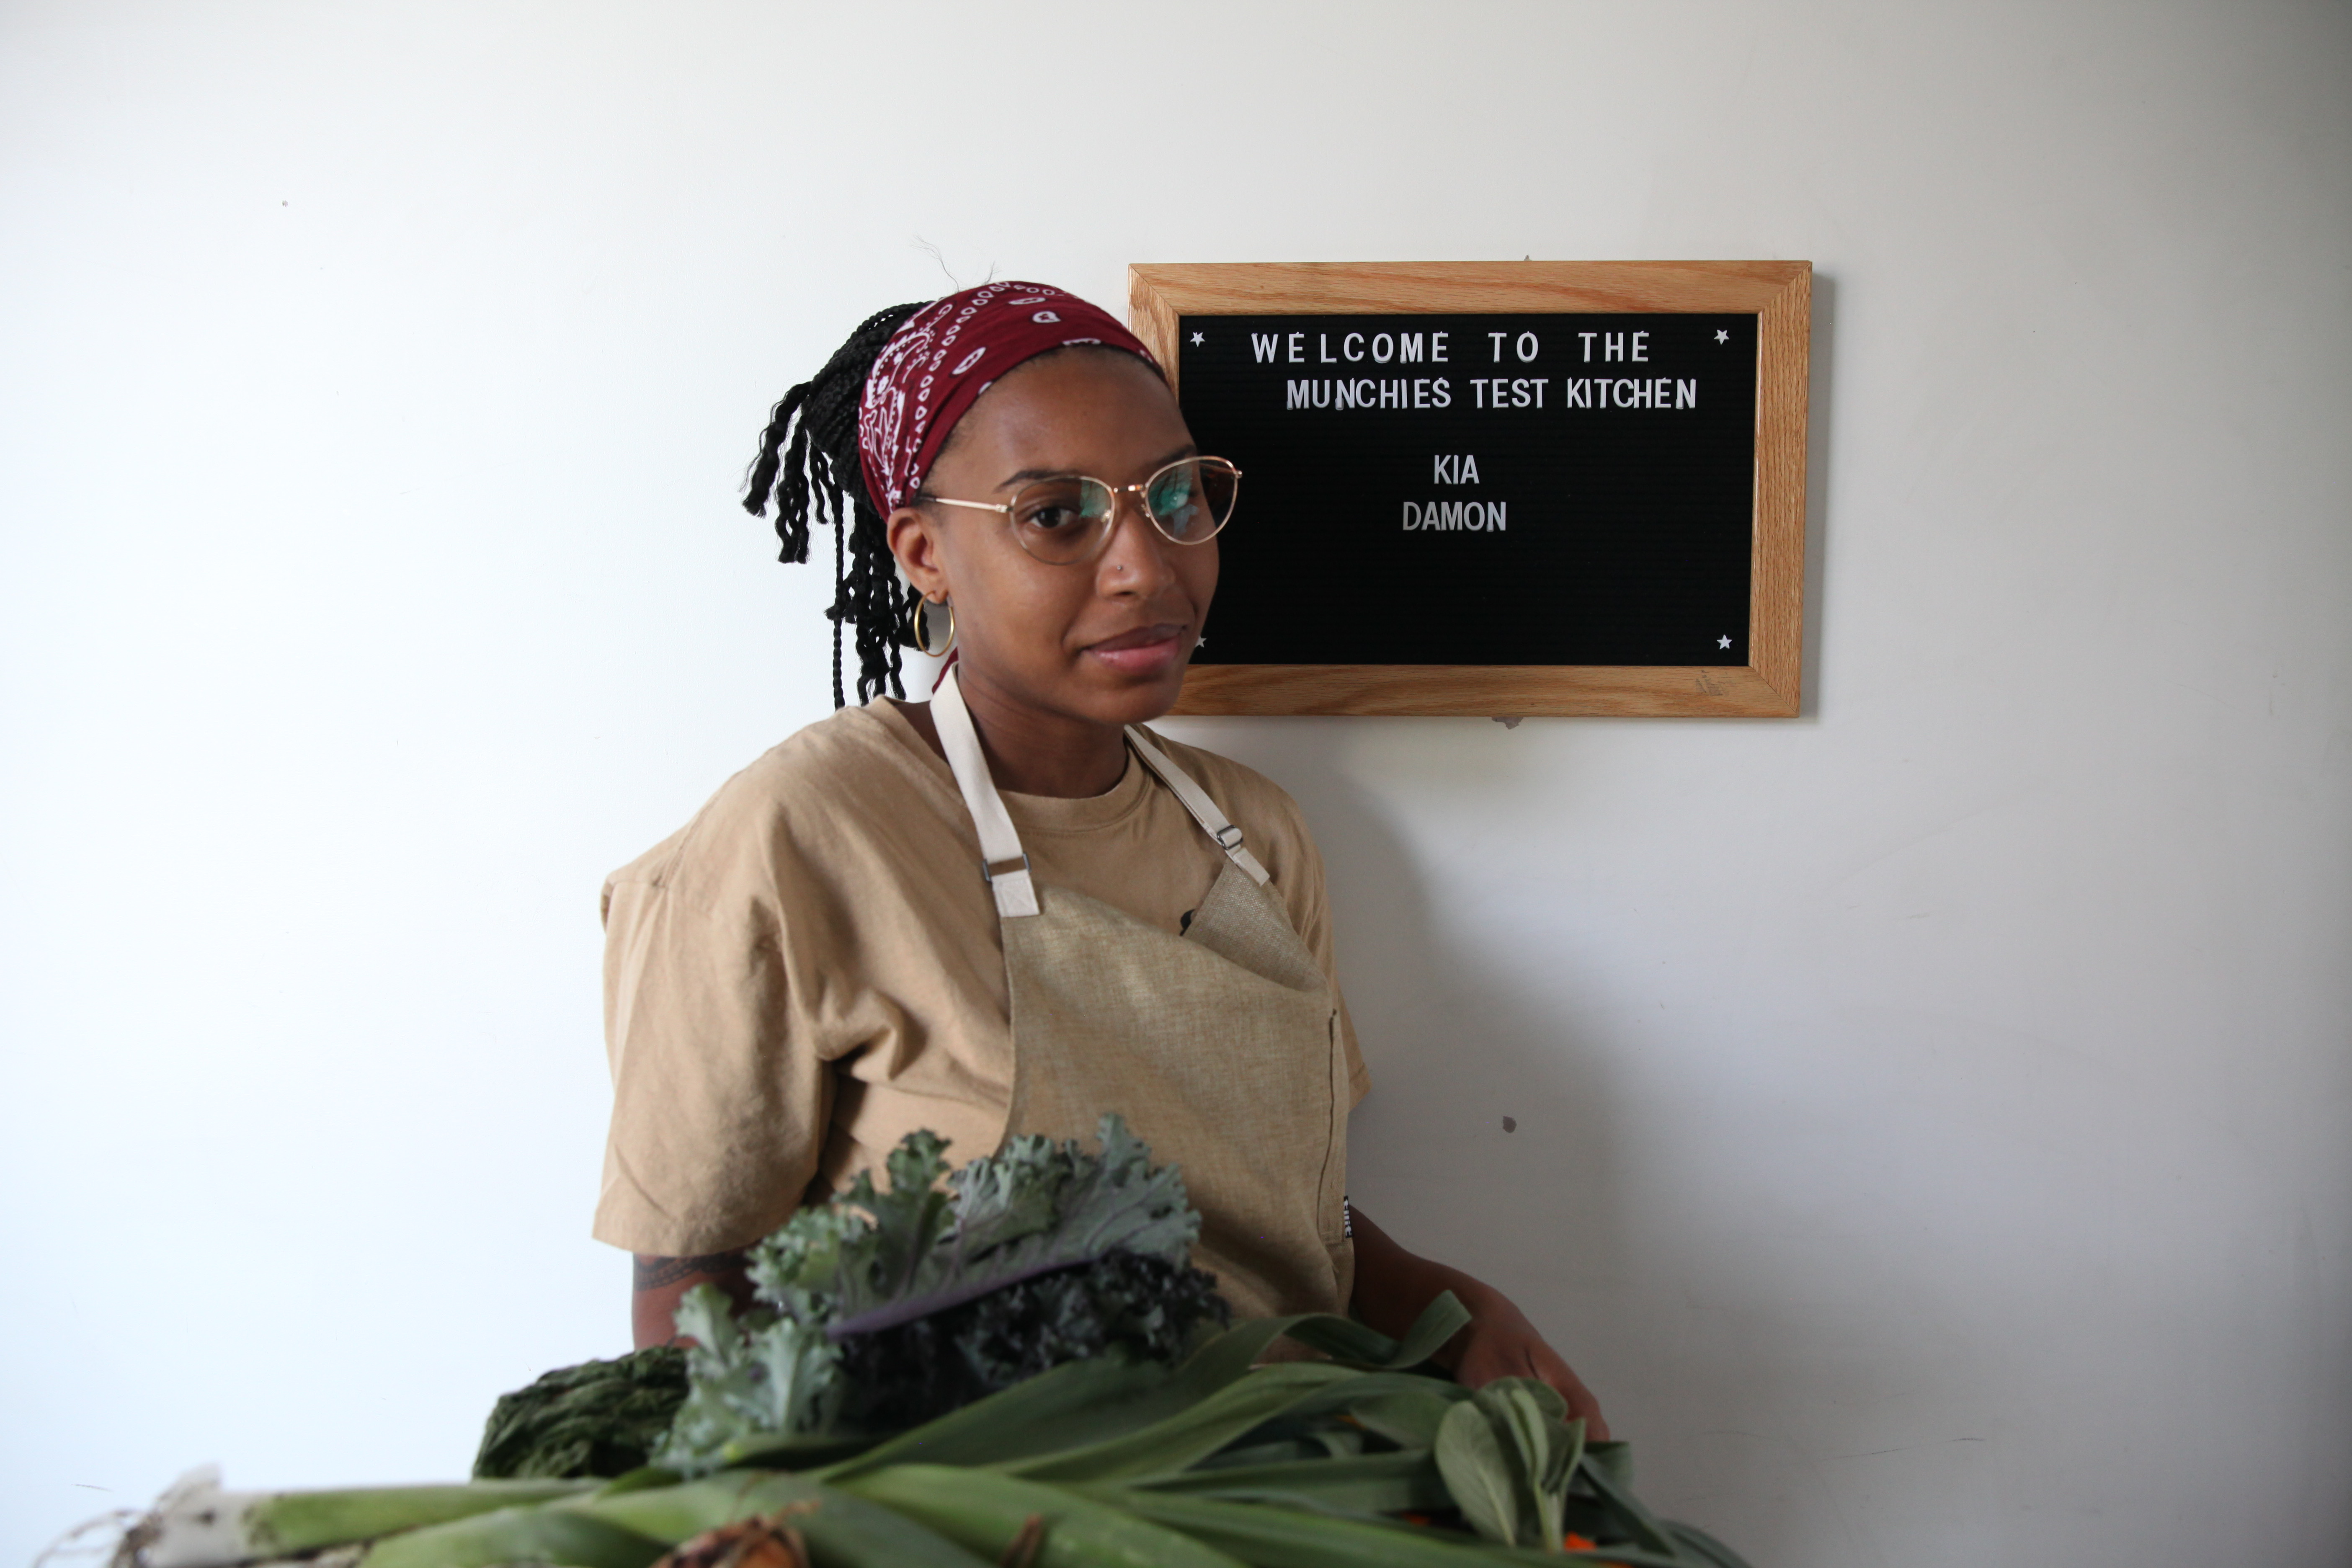 chef kia damon in the munchies test kitchen, holding a tray of freshly picked vegetables